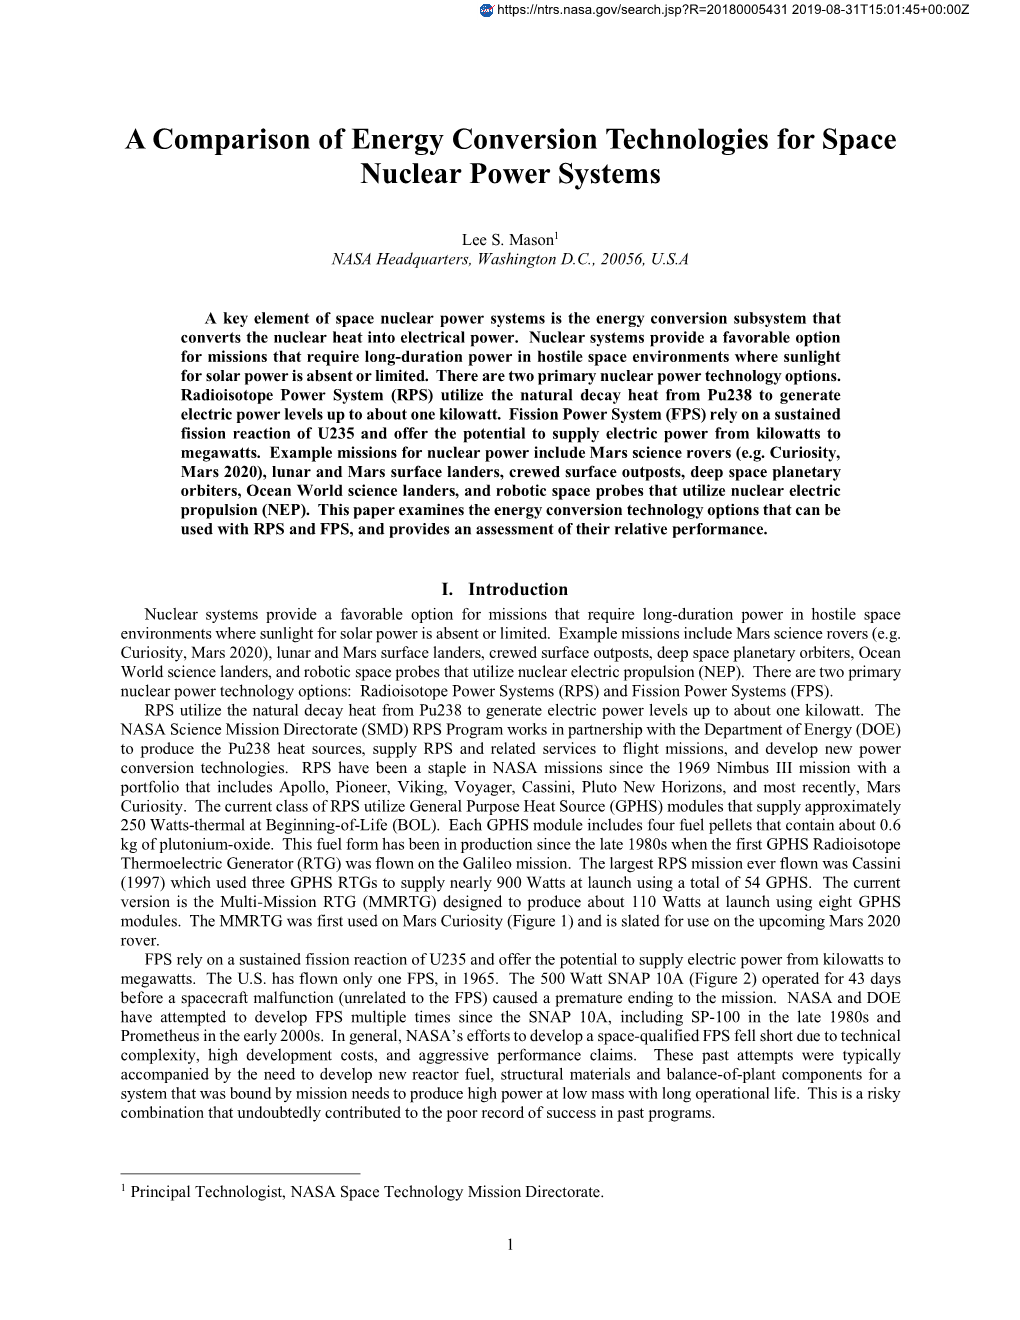 A Comparison of Energy Conversion Technologies for Space Nuclear Power Systems